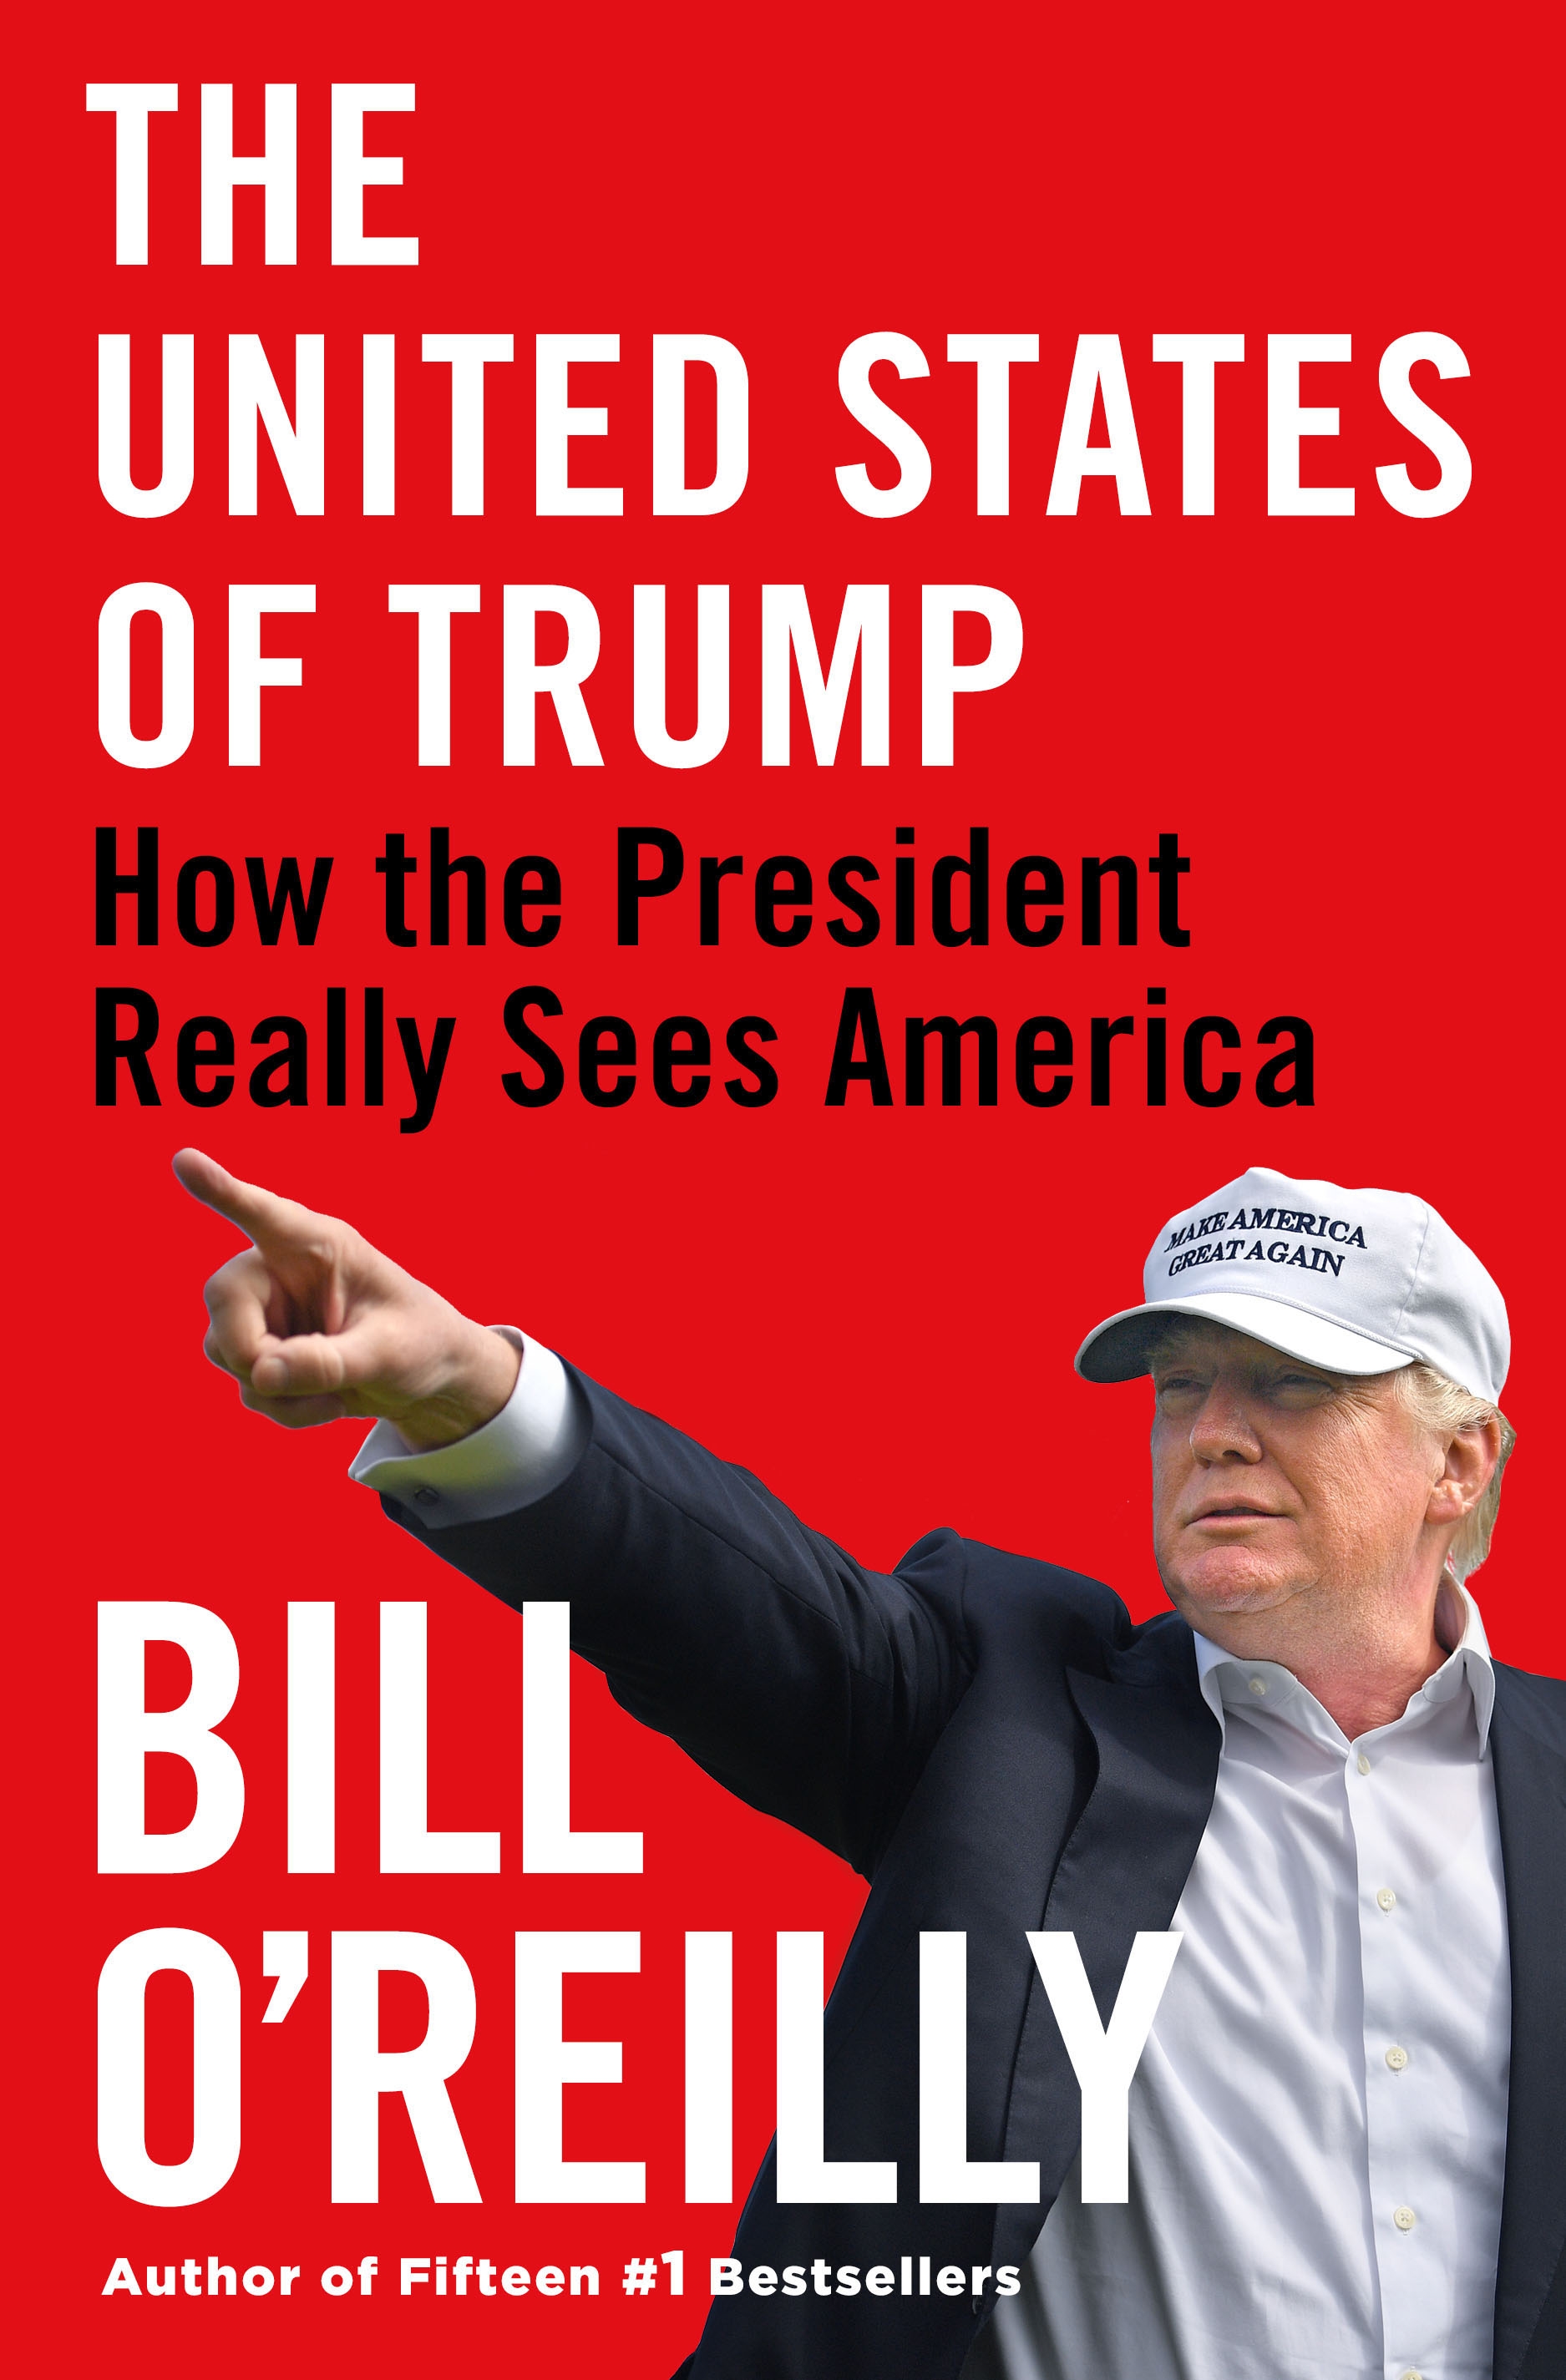 Book “The United States of Trump” by Bill O'Reilly — September 24, 2019